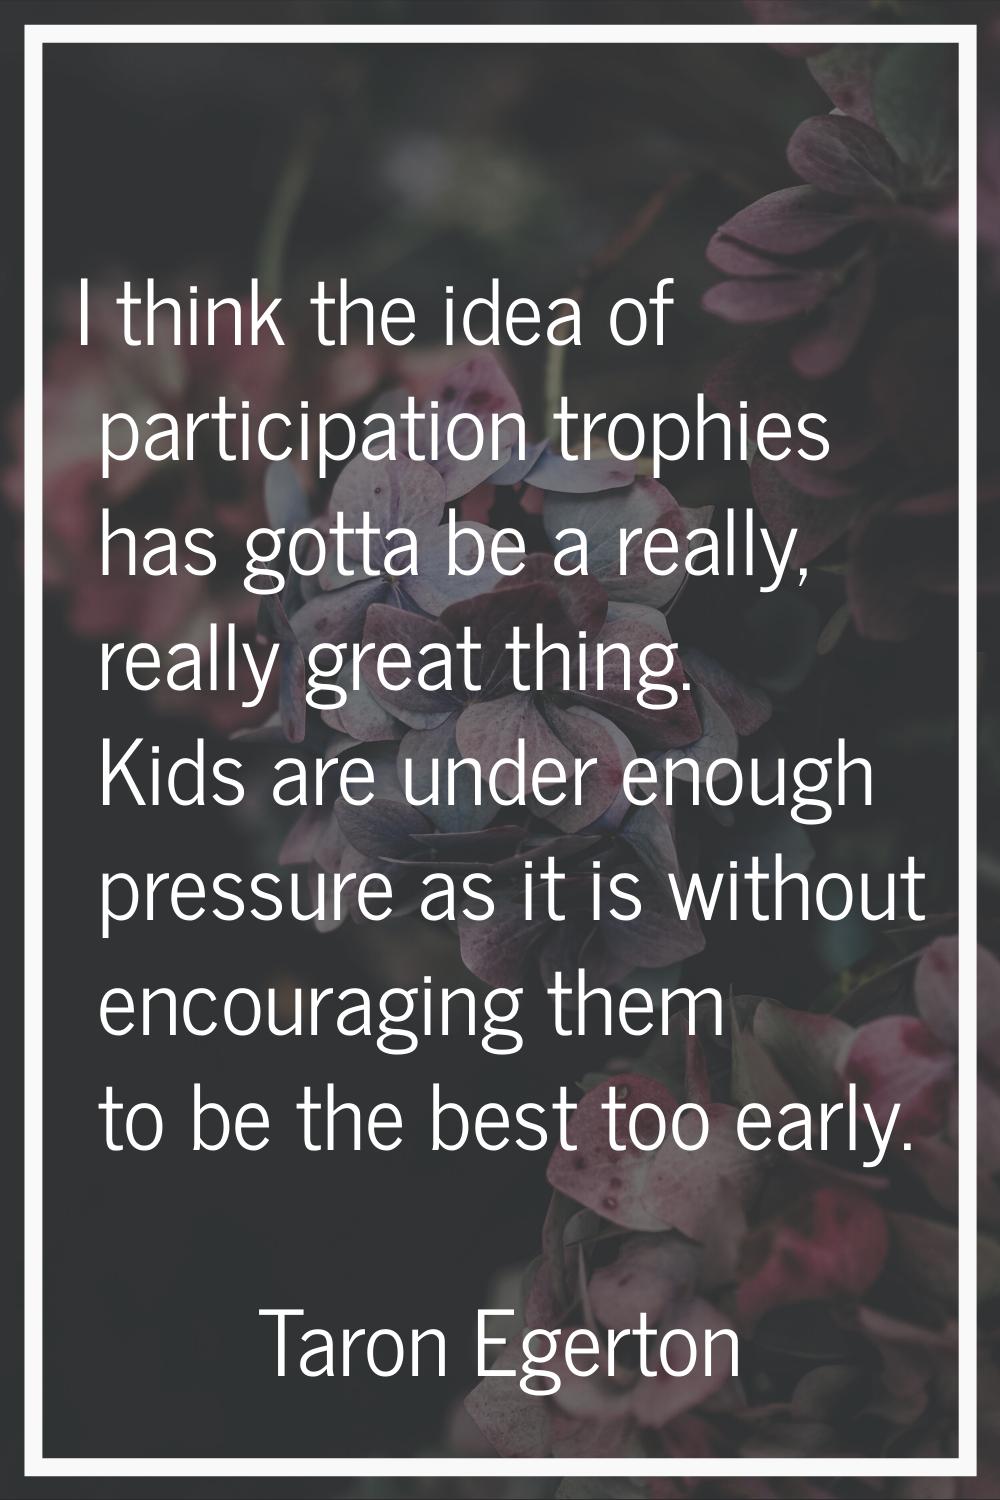 I think the idea of participation trophies has gotta be a really, really great thing. Kids are unde